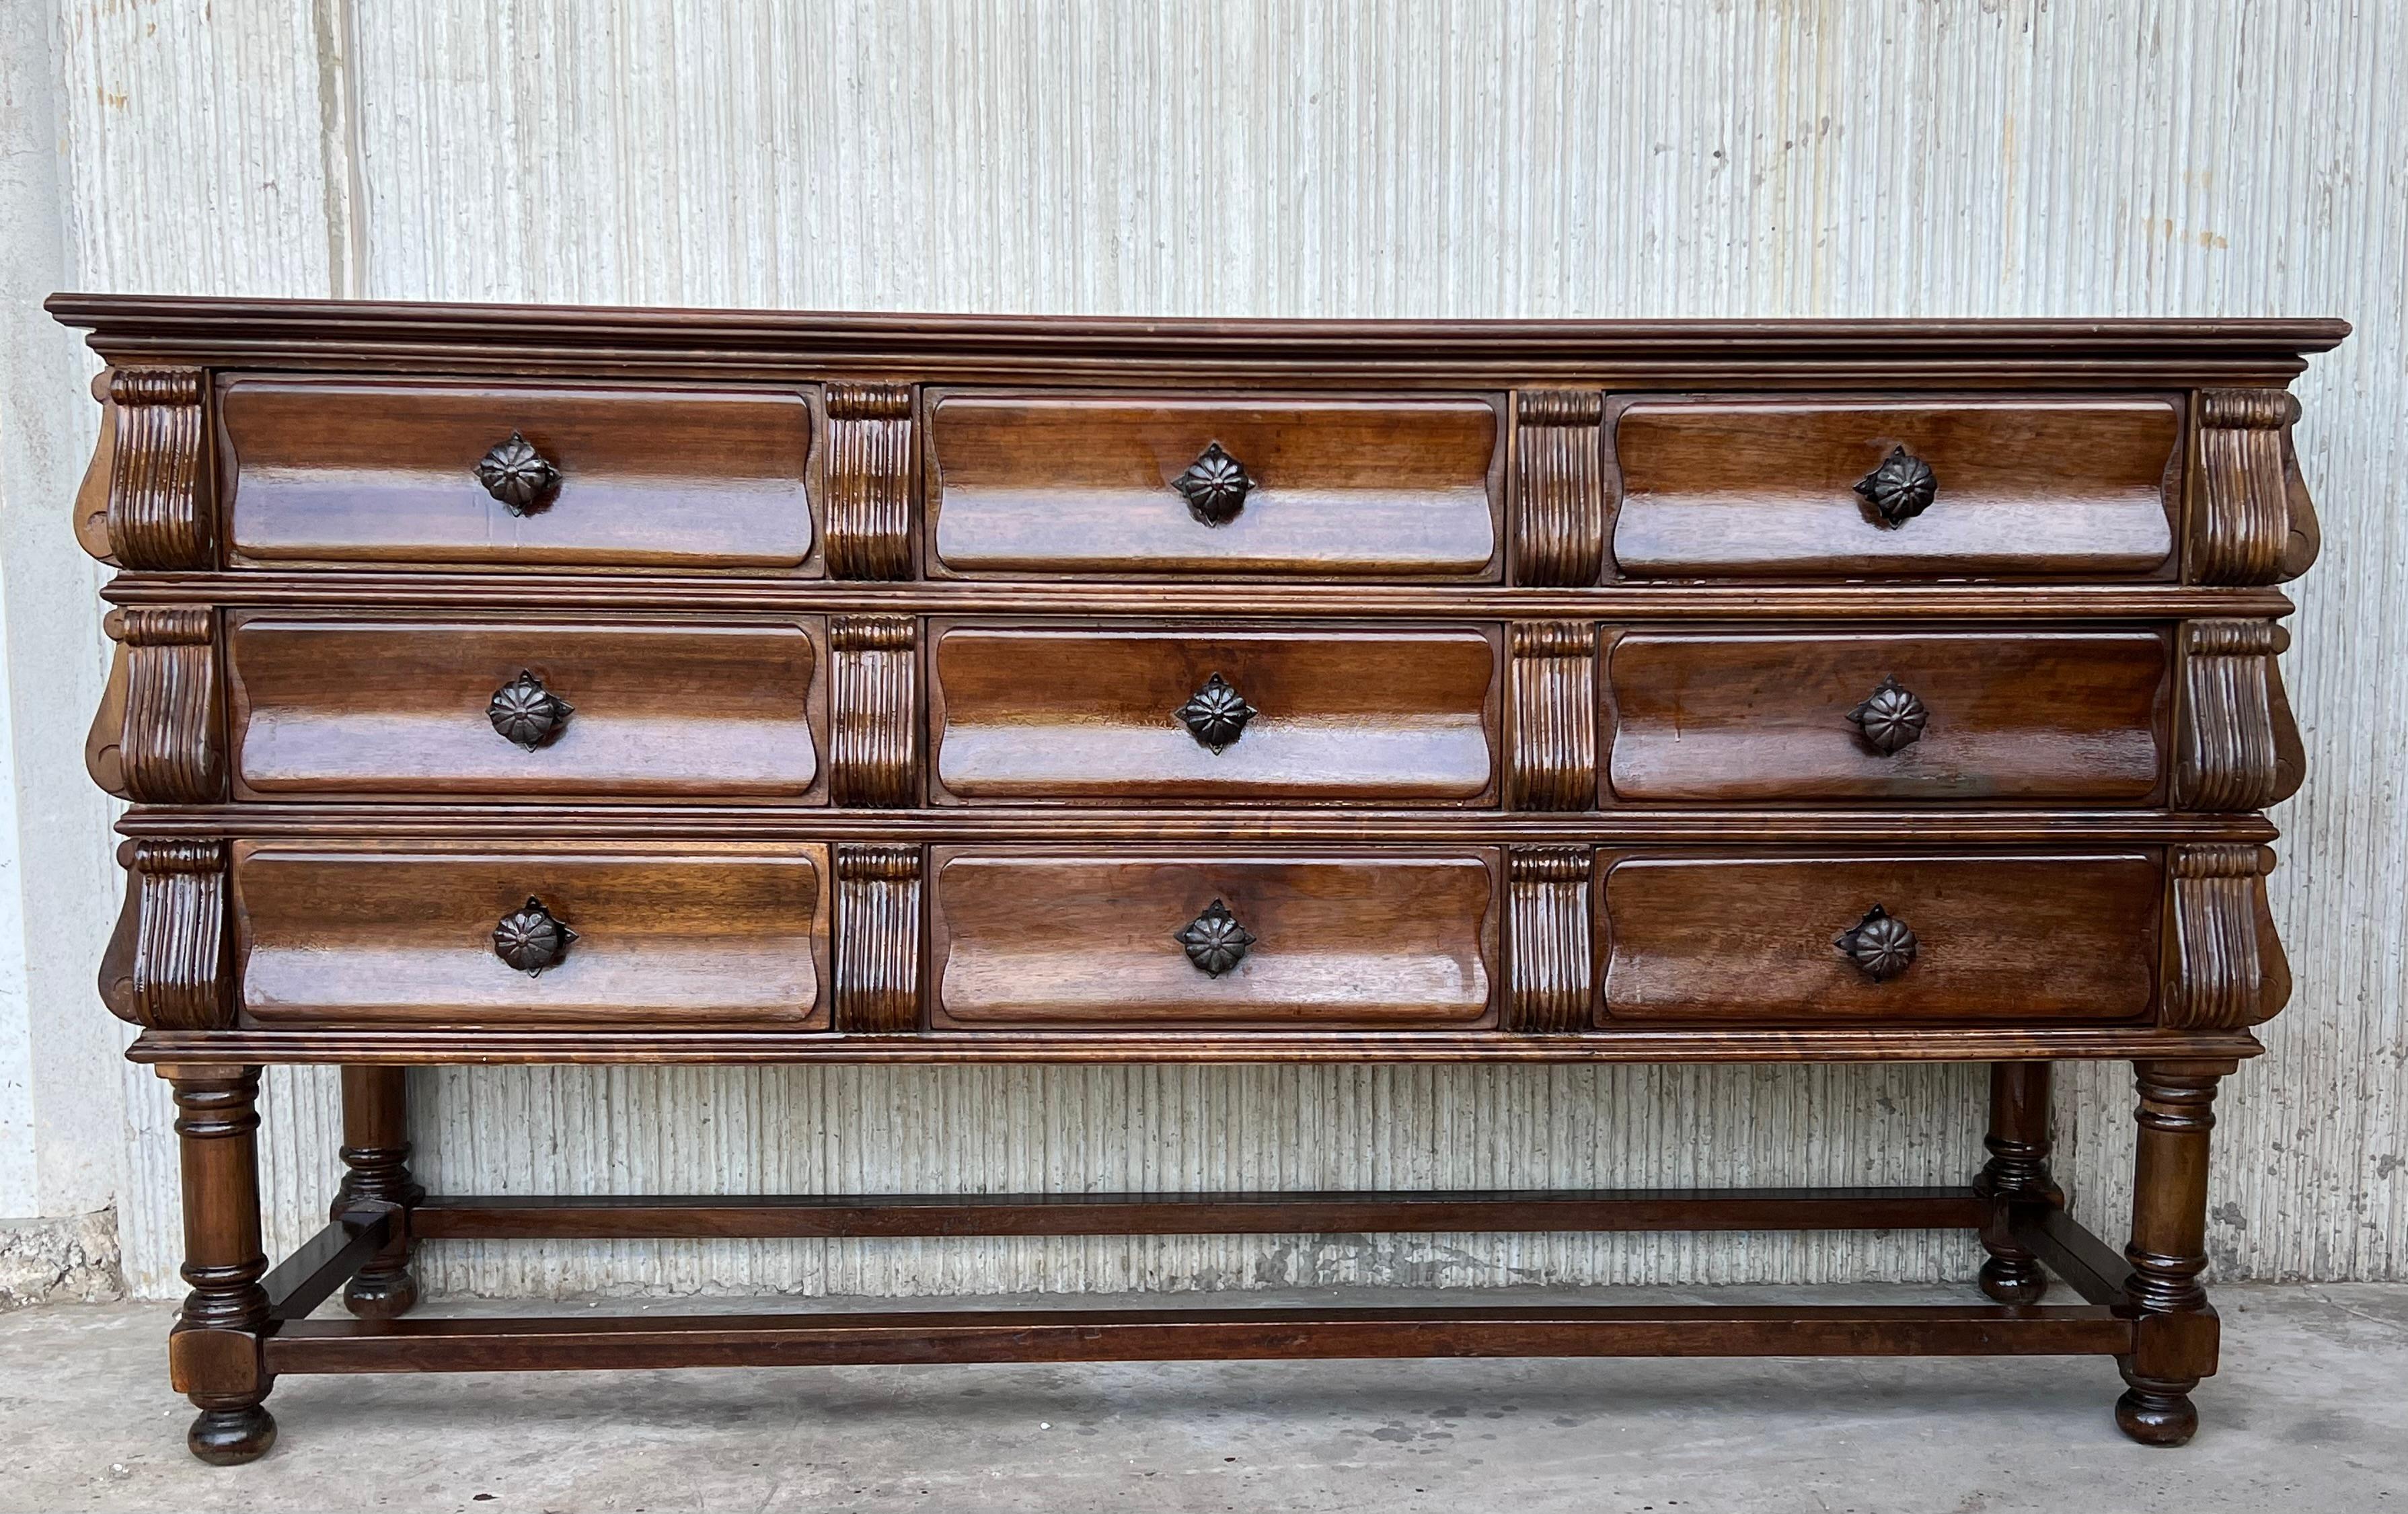 A museum quality, Spanish, Late-Renaissance, cedar enclosed chest of drawers with exceptional walnut in architectural or façade front This is the most sophisticated Spanish model of chest of drawers conceived as a cabinet piece with an architectural